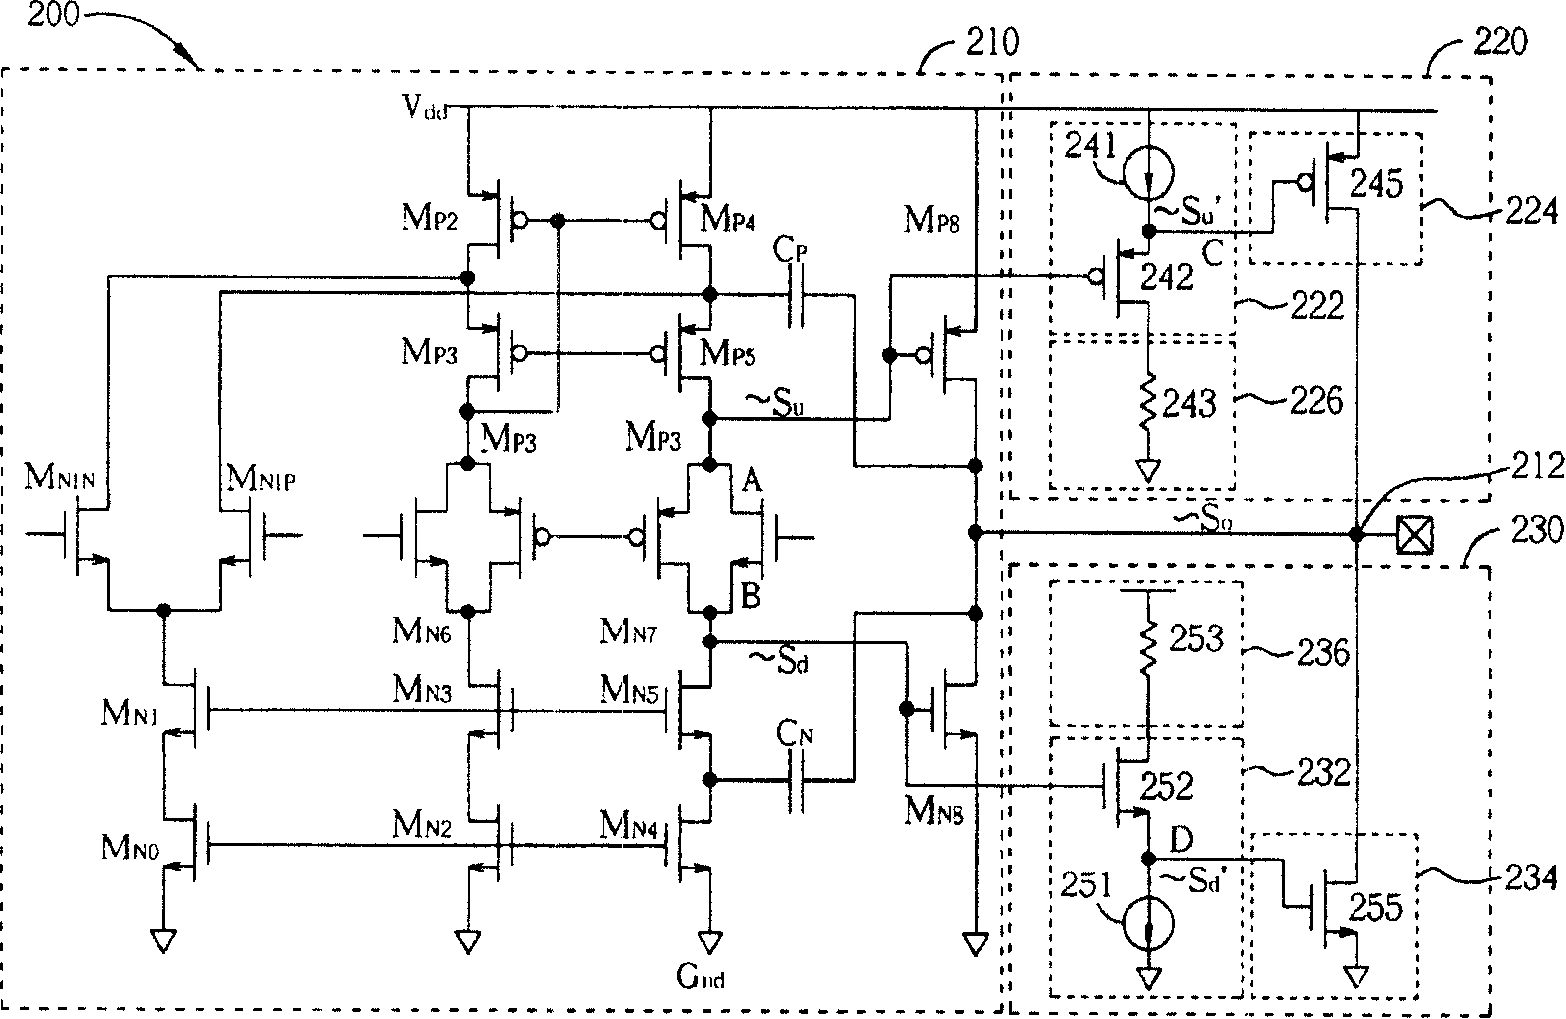 Amplifying circuit with pull-up and pull-down circuit to increase turning rate